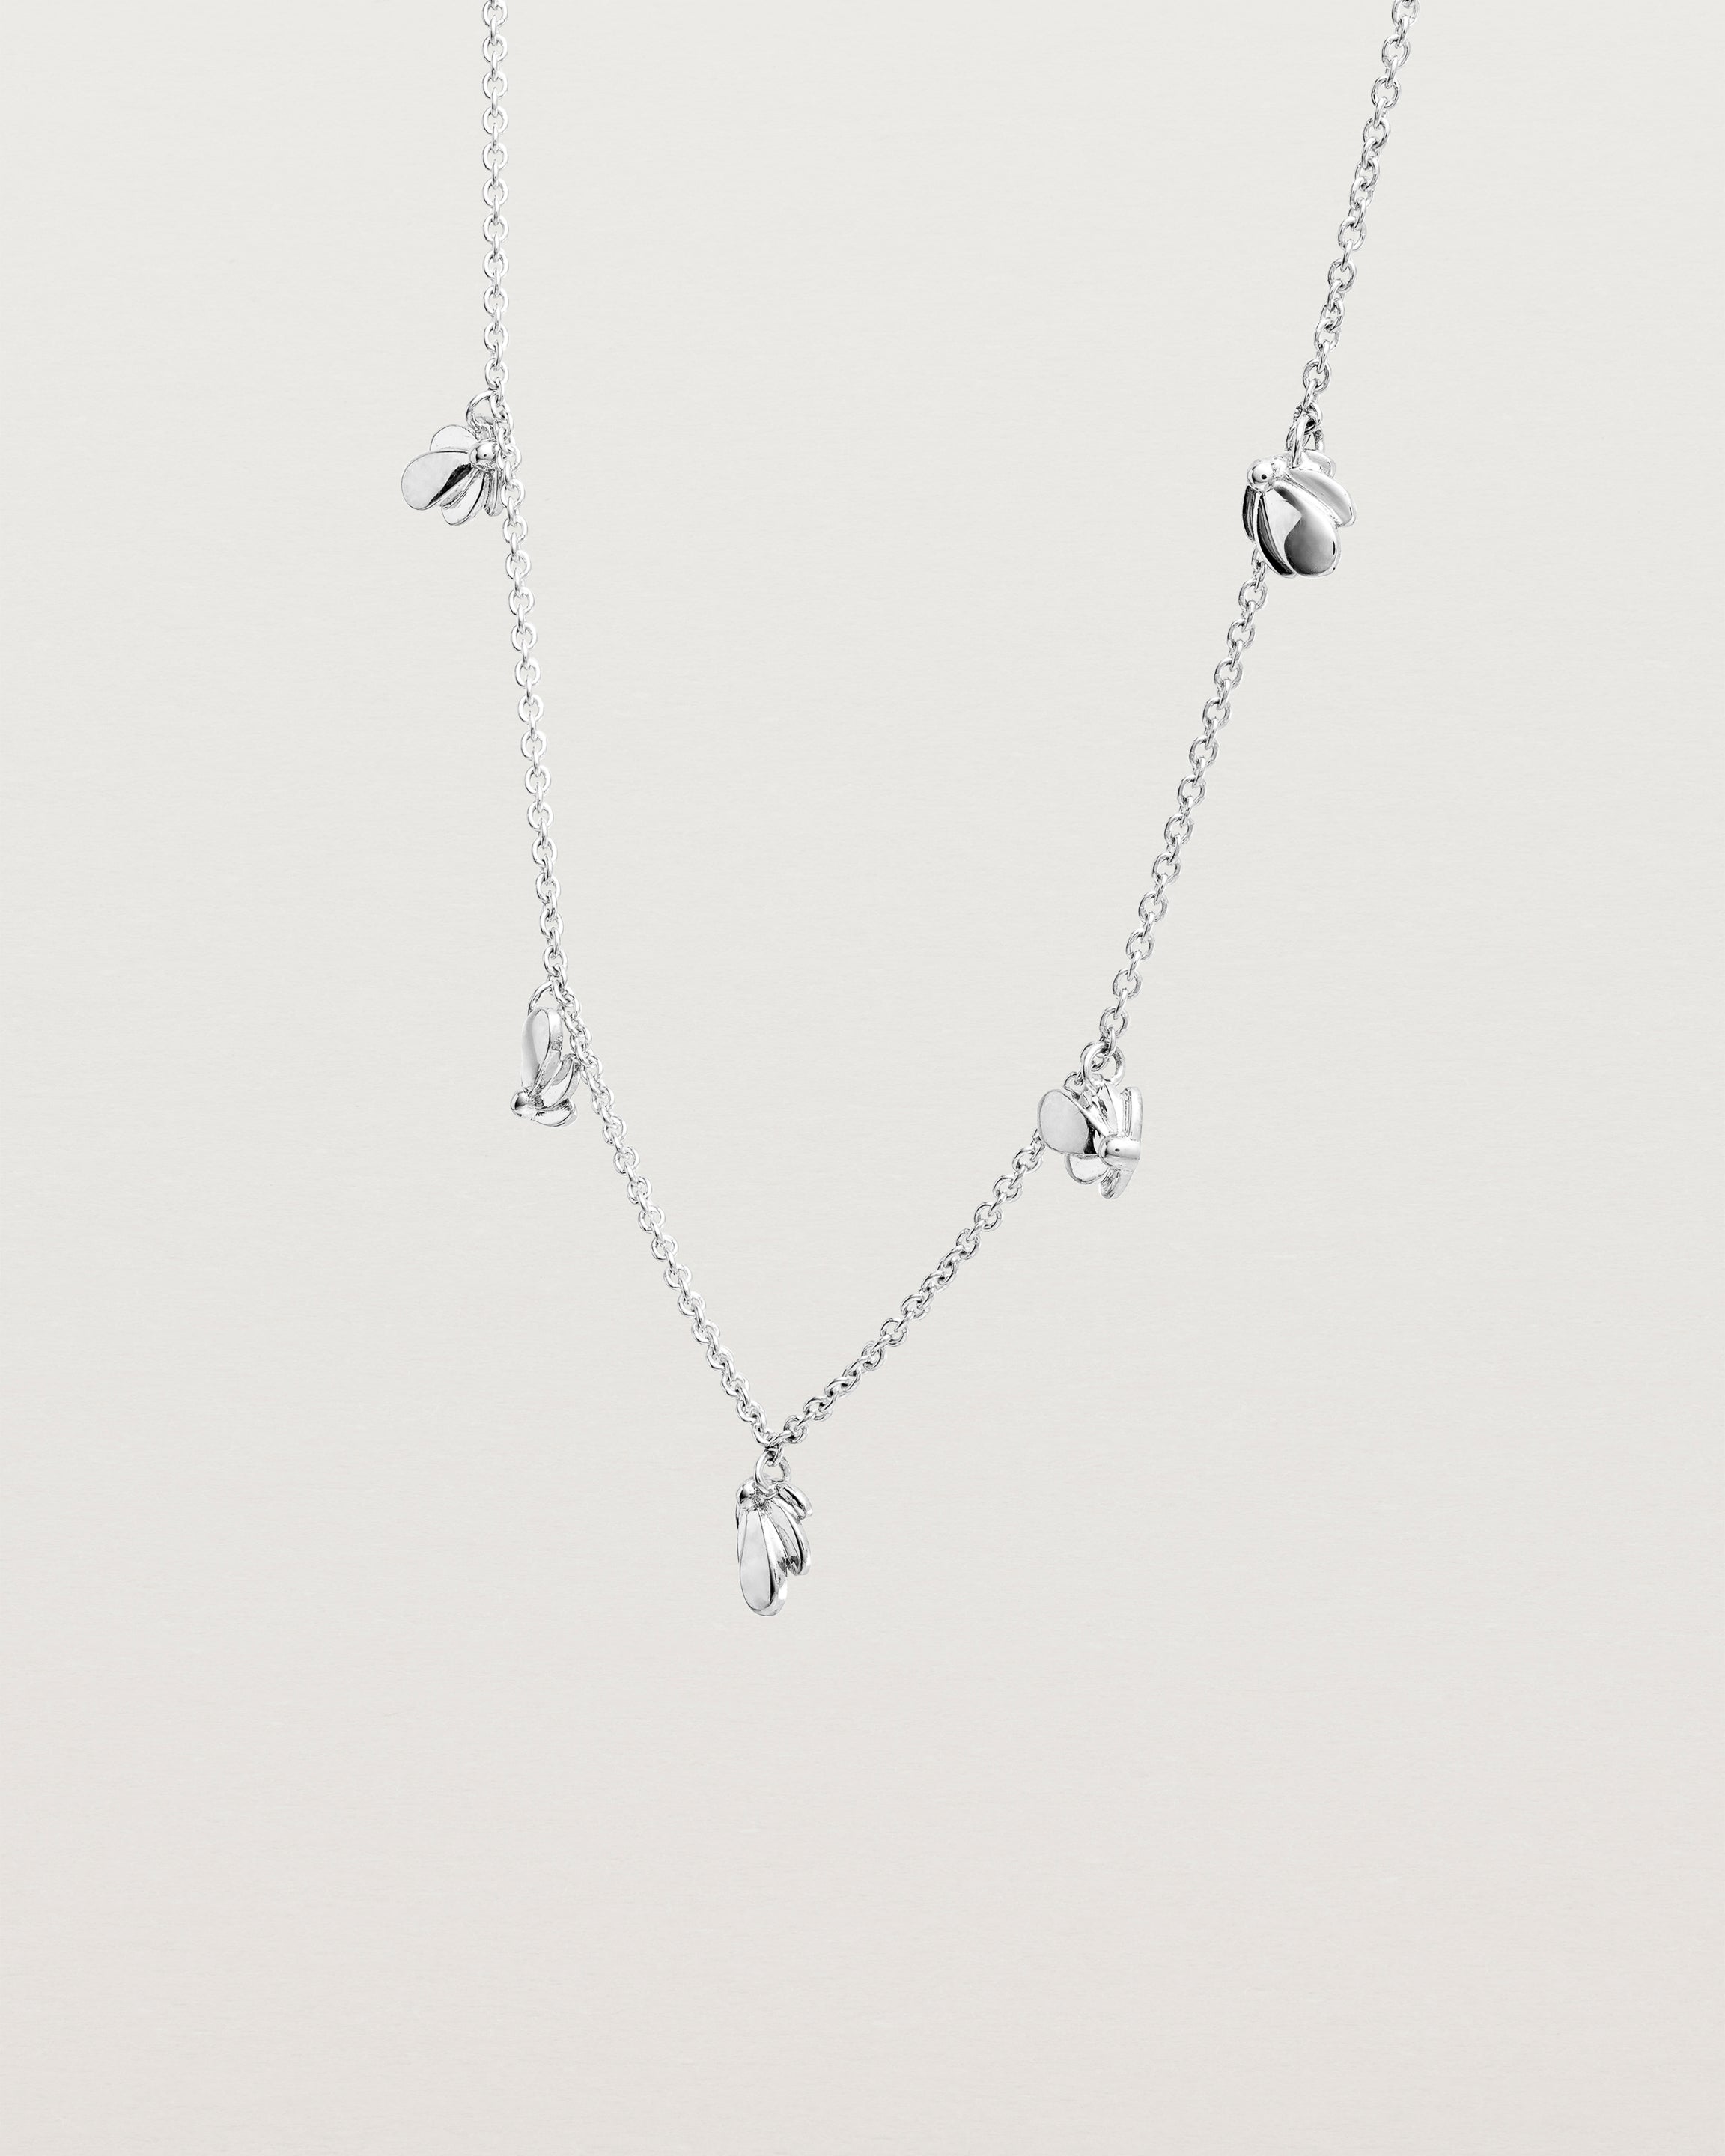 Angled view of the Aeris Charm Necklace in Sterling Silver.